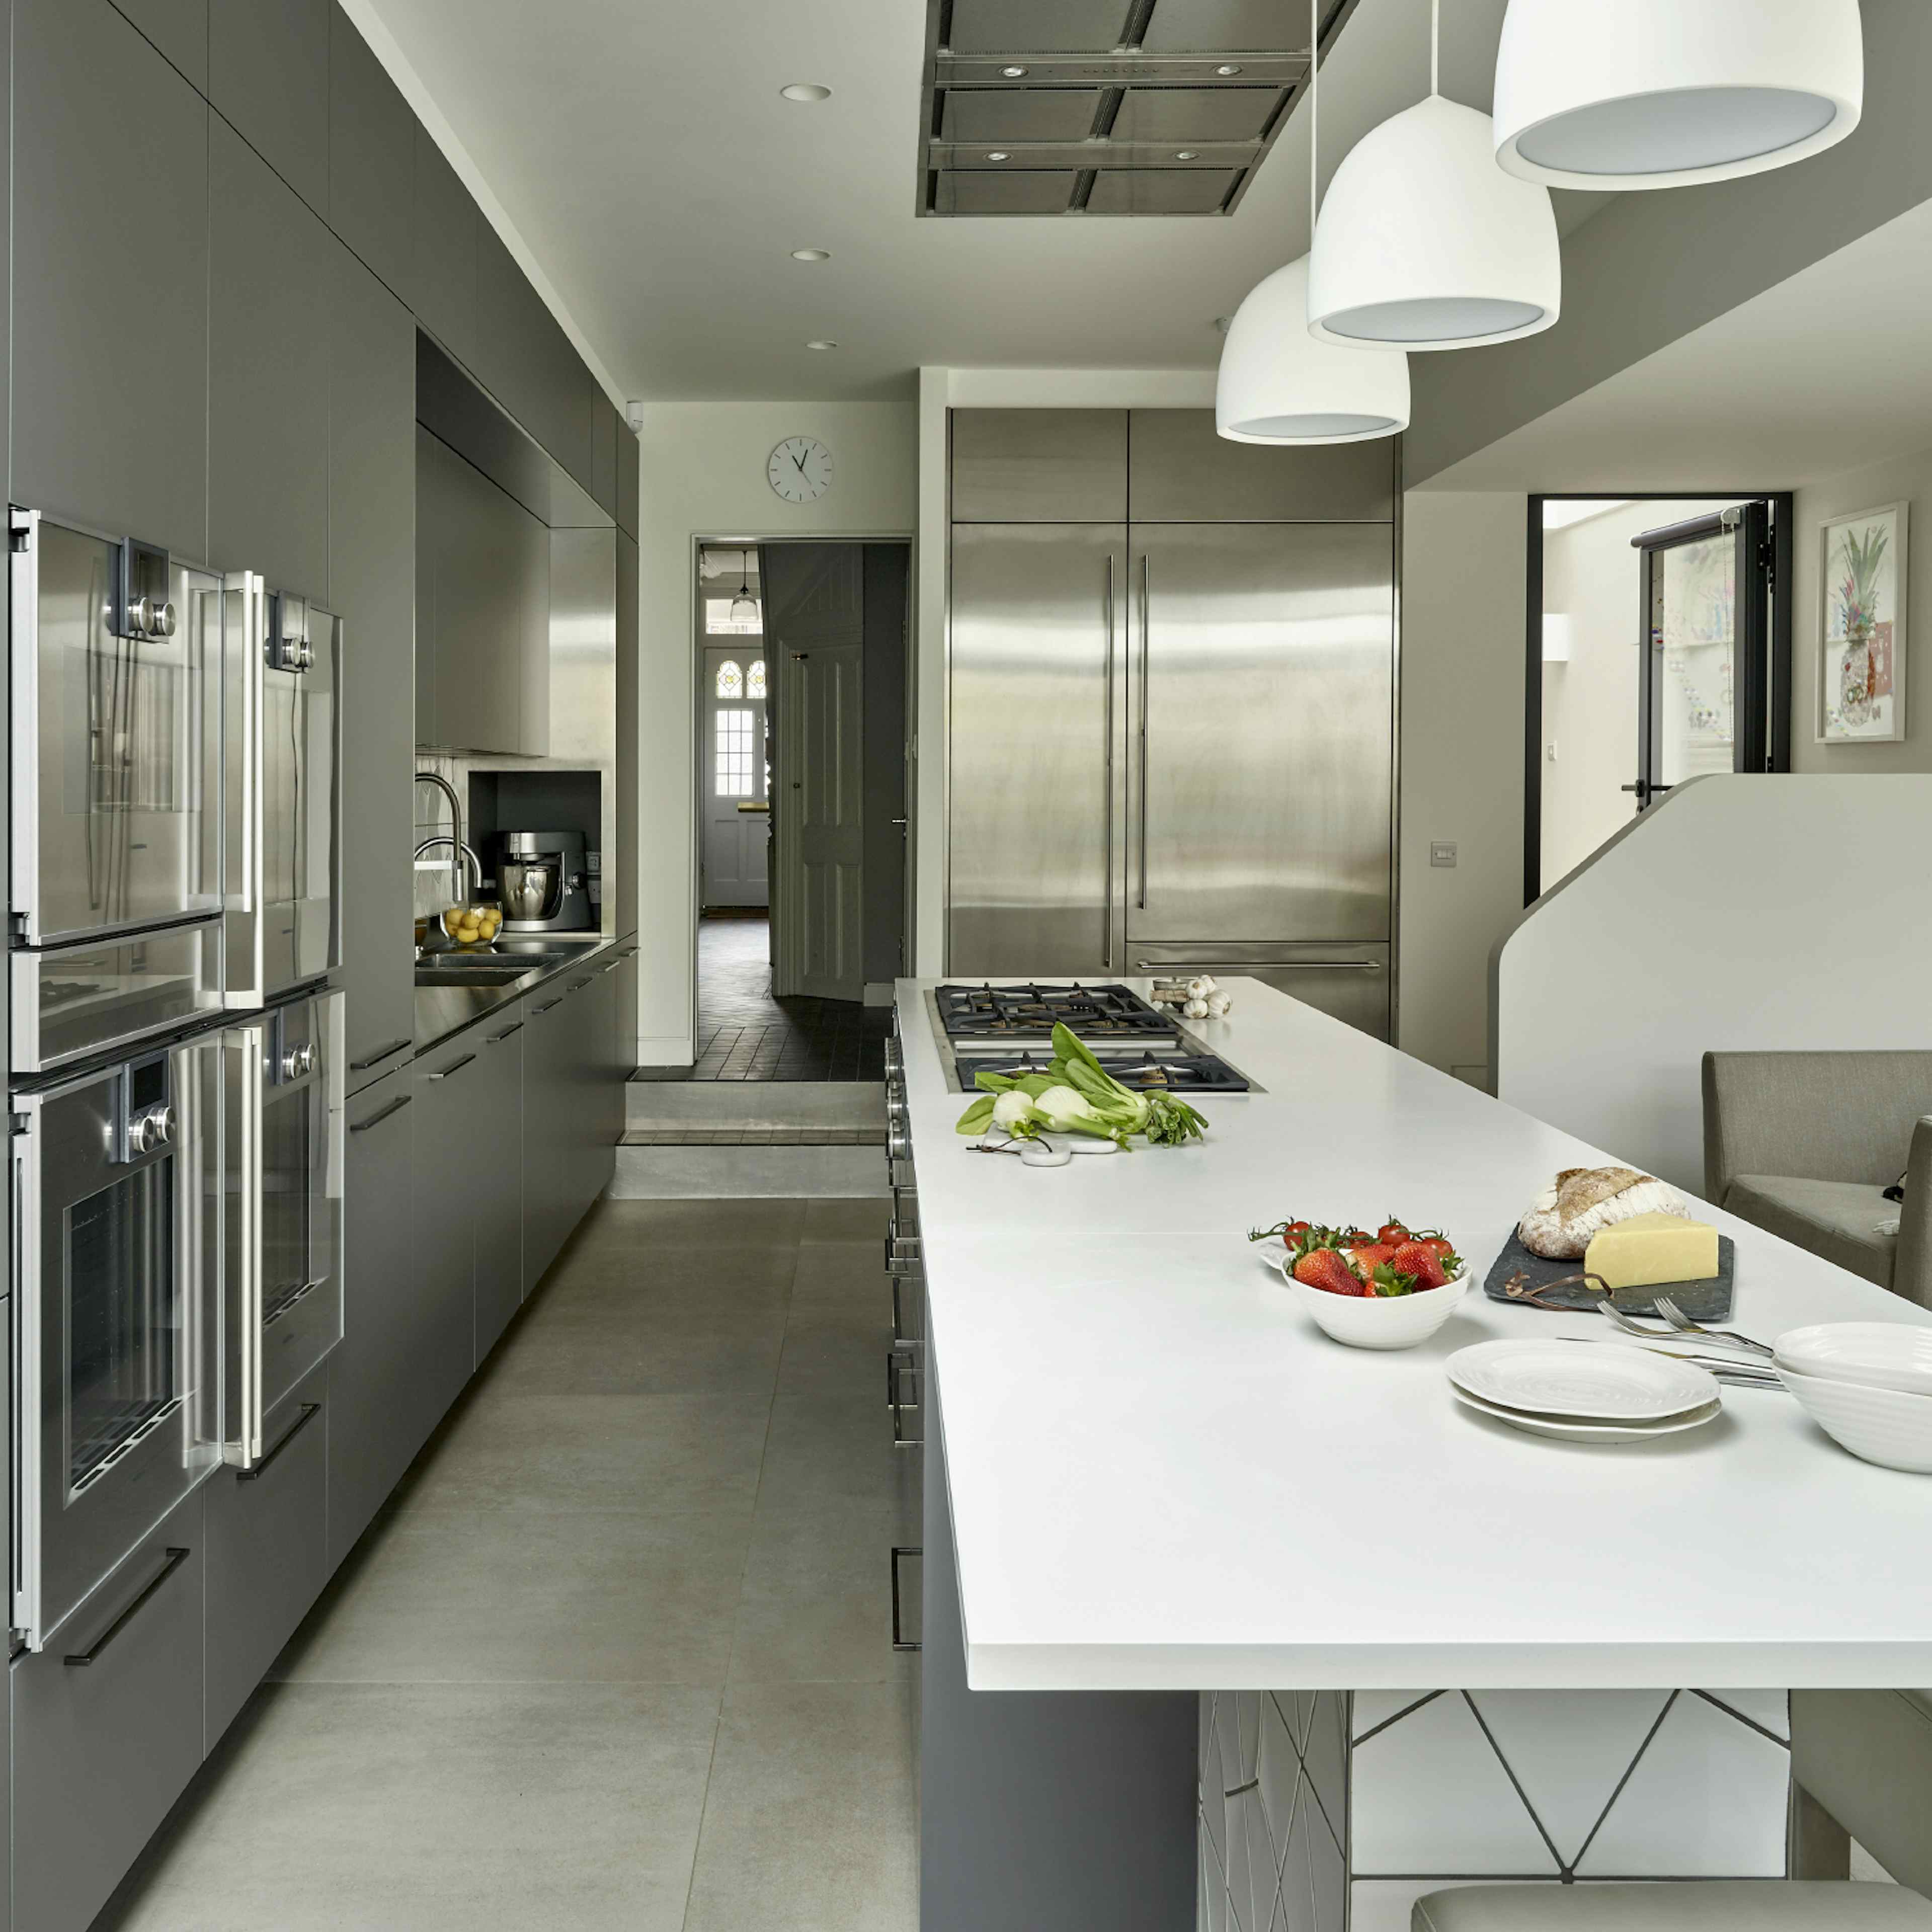 Beautiful home kitchen and cookery school - Kitchen and Cookery School image 2